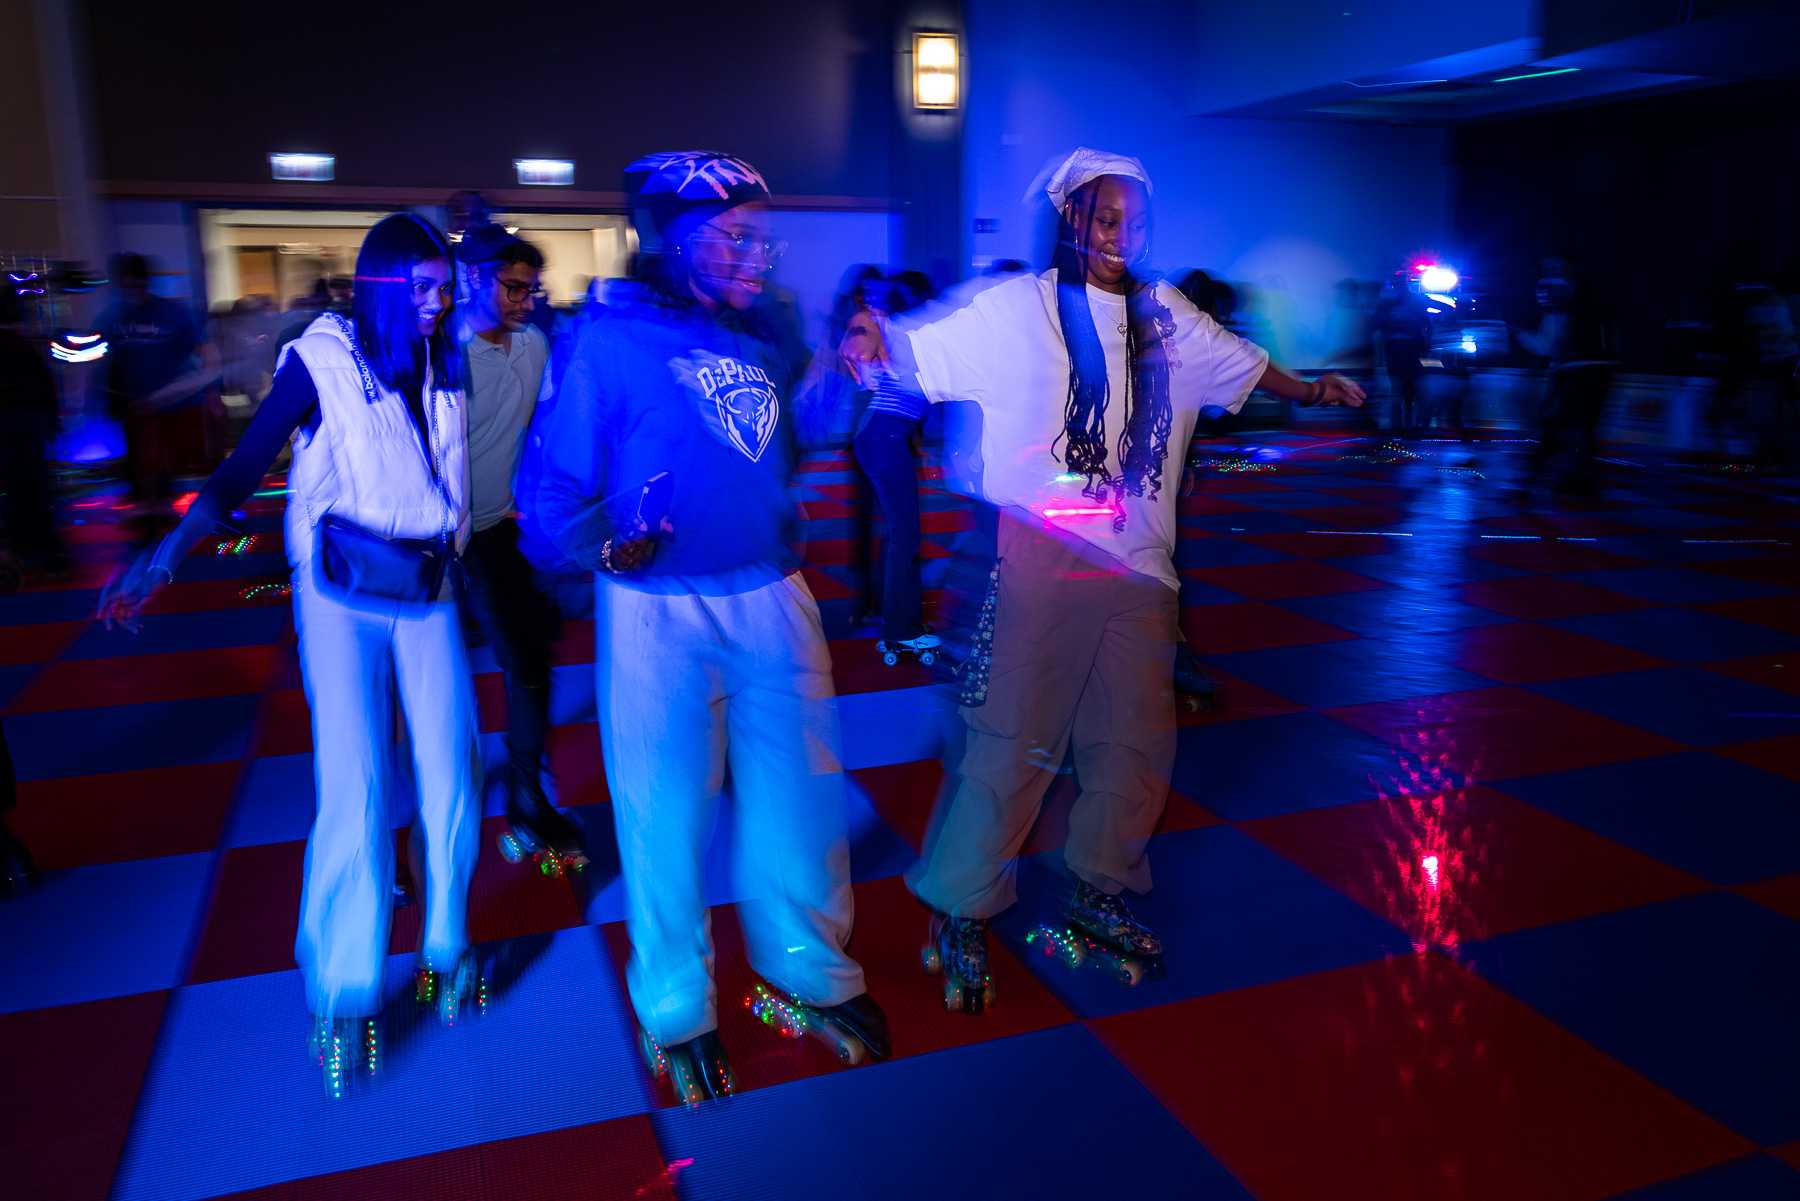 Before the night was over, students did their best to stay upright in a disco roller rink setup in Student Center 120AB. (Photo by Jeff Carrion / DePaul University) 